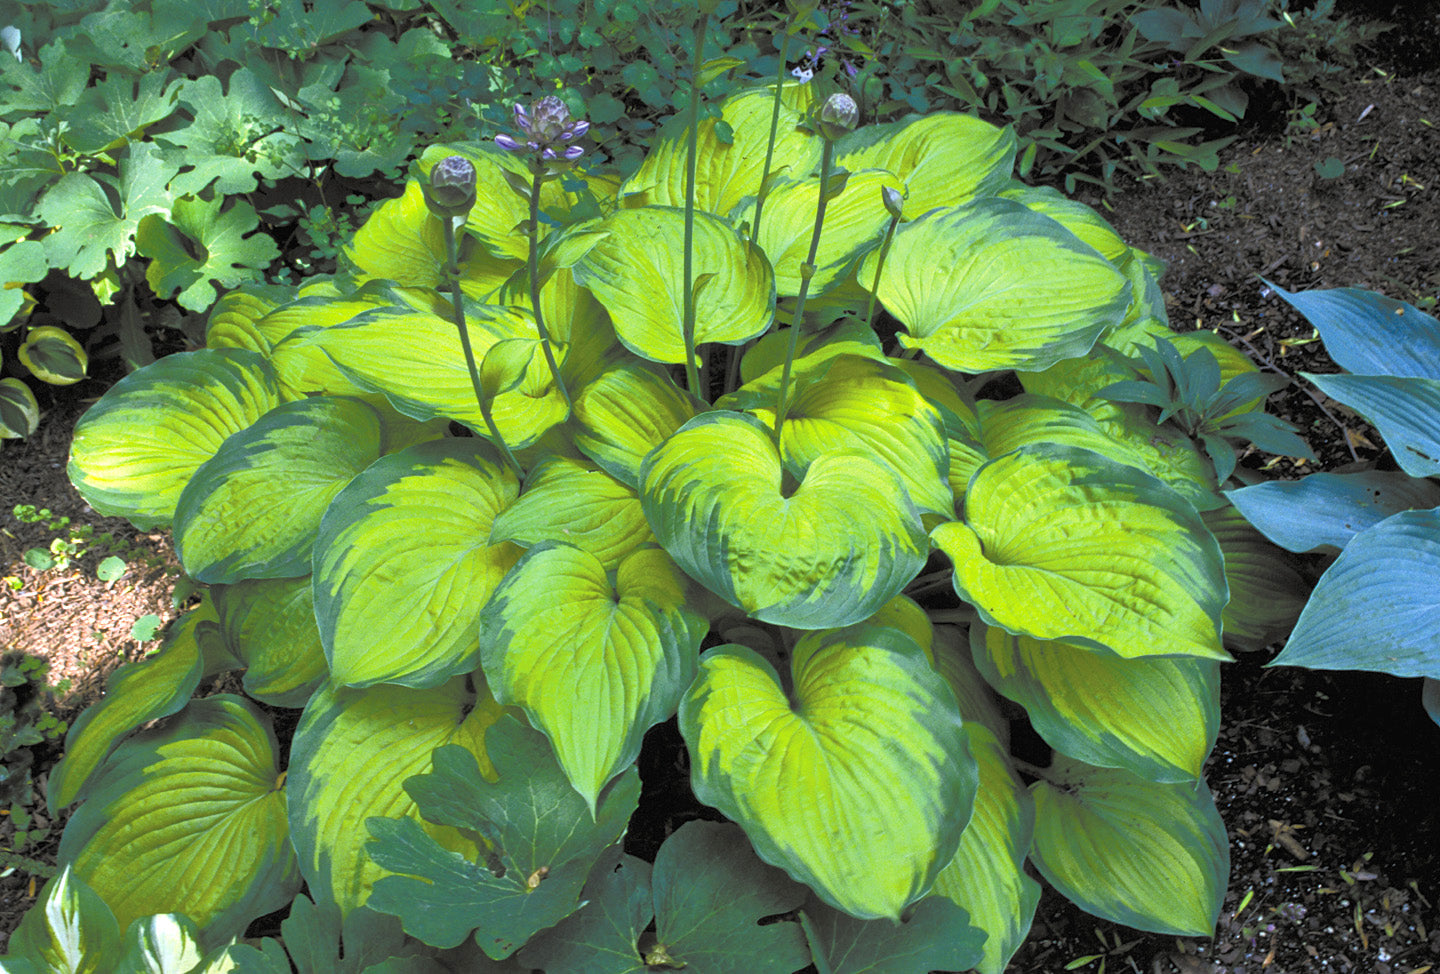 Hosta hybrid Old Glory Plantain Lily Image Credit: Ball Horticulture